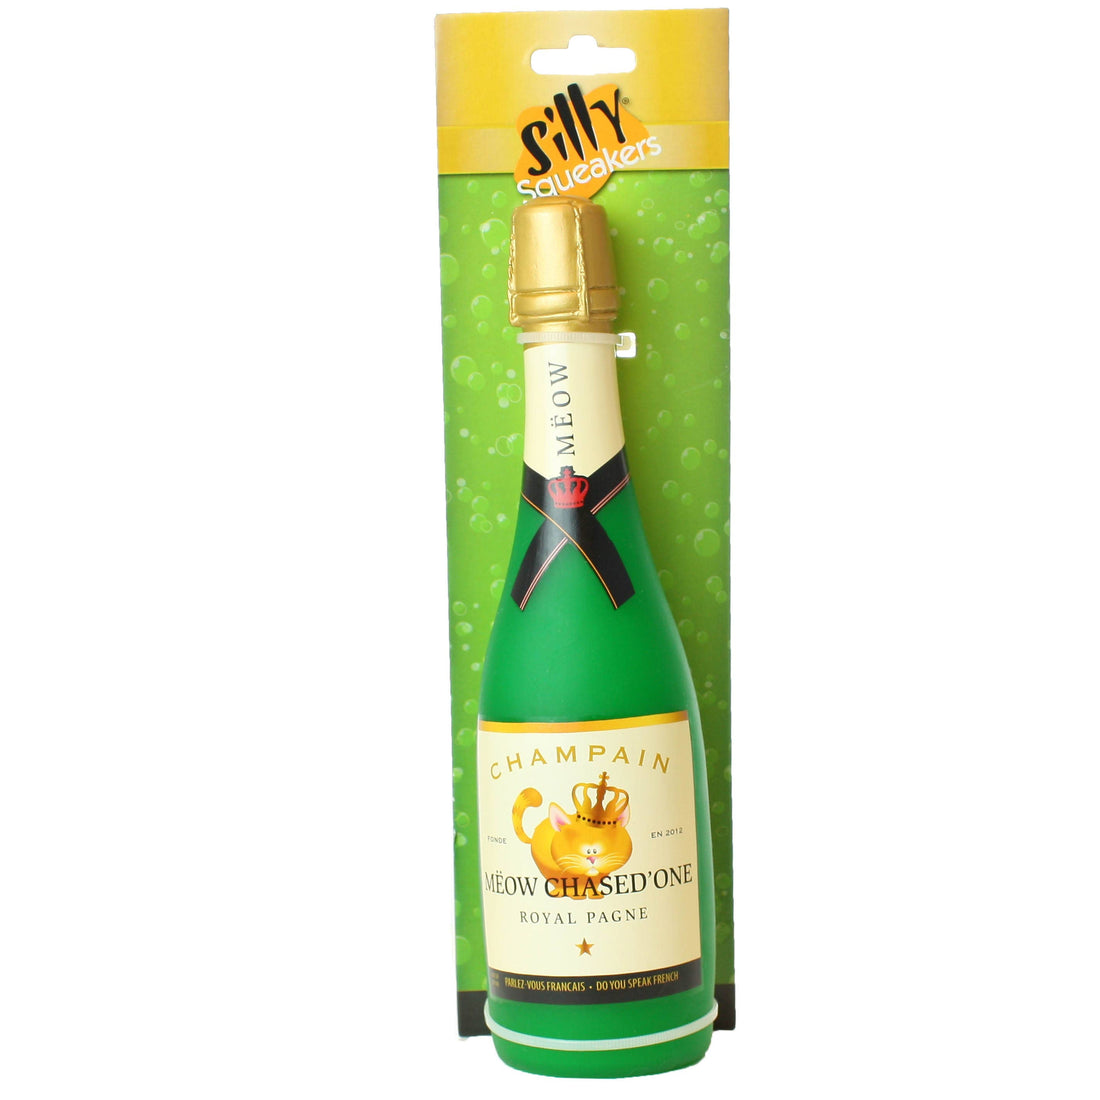 Silly Squeaker Wine Bottle - Meow Chased One